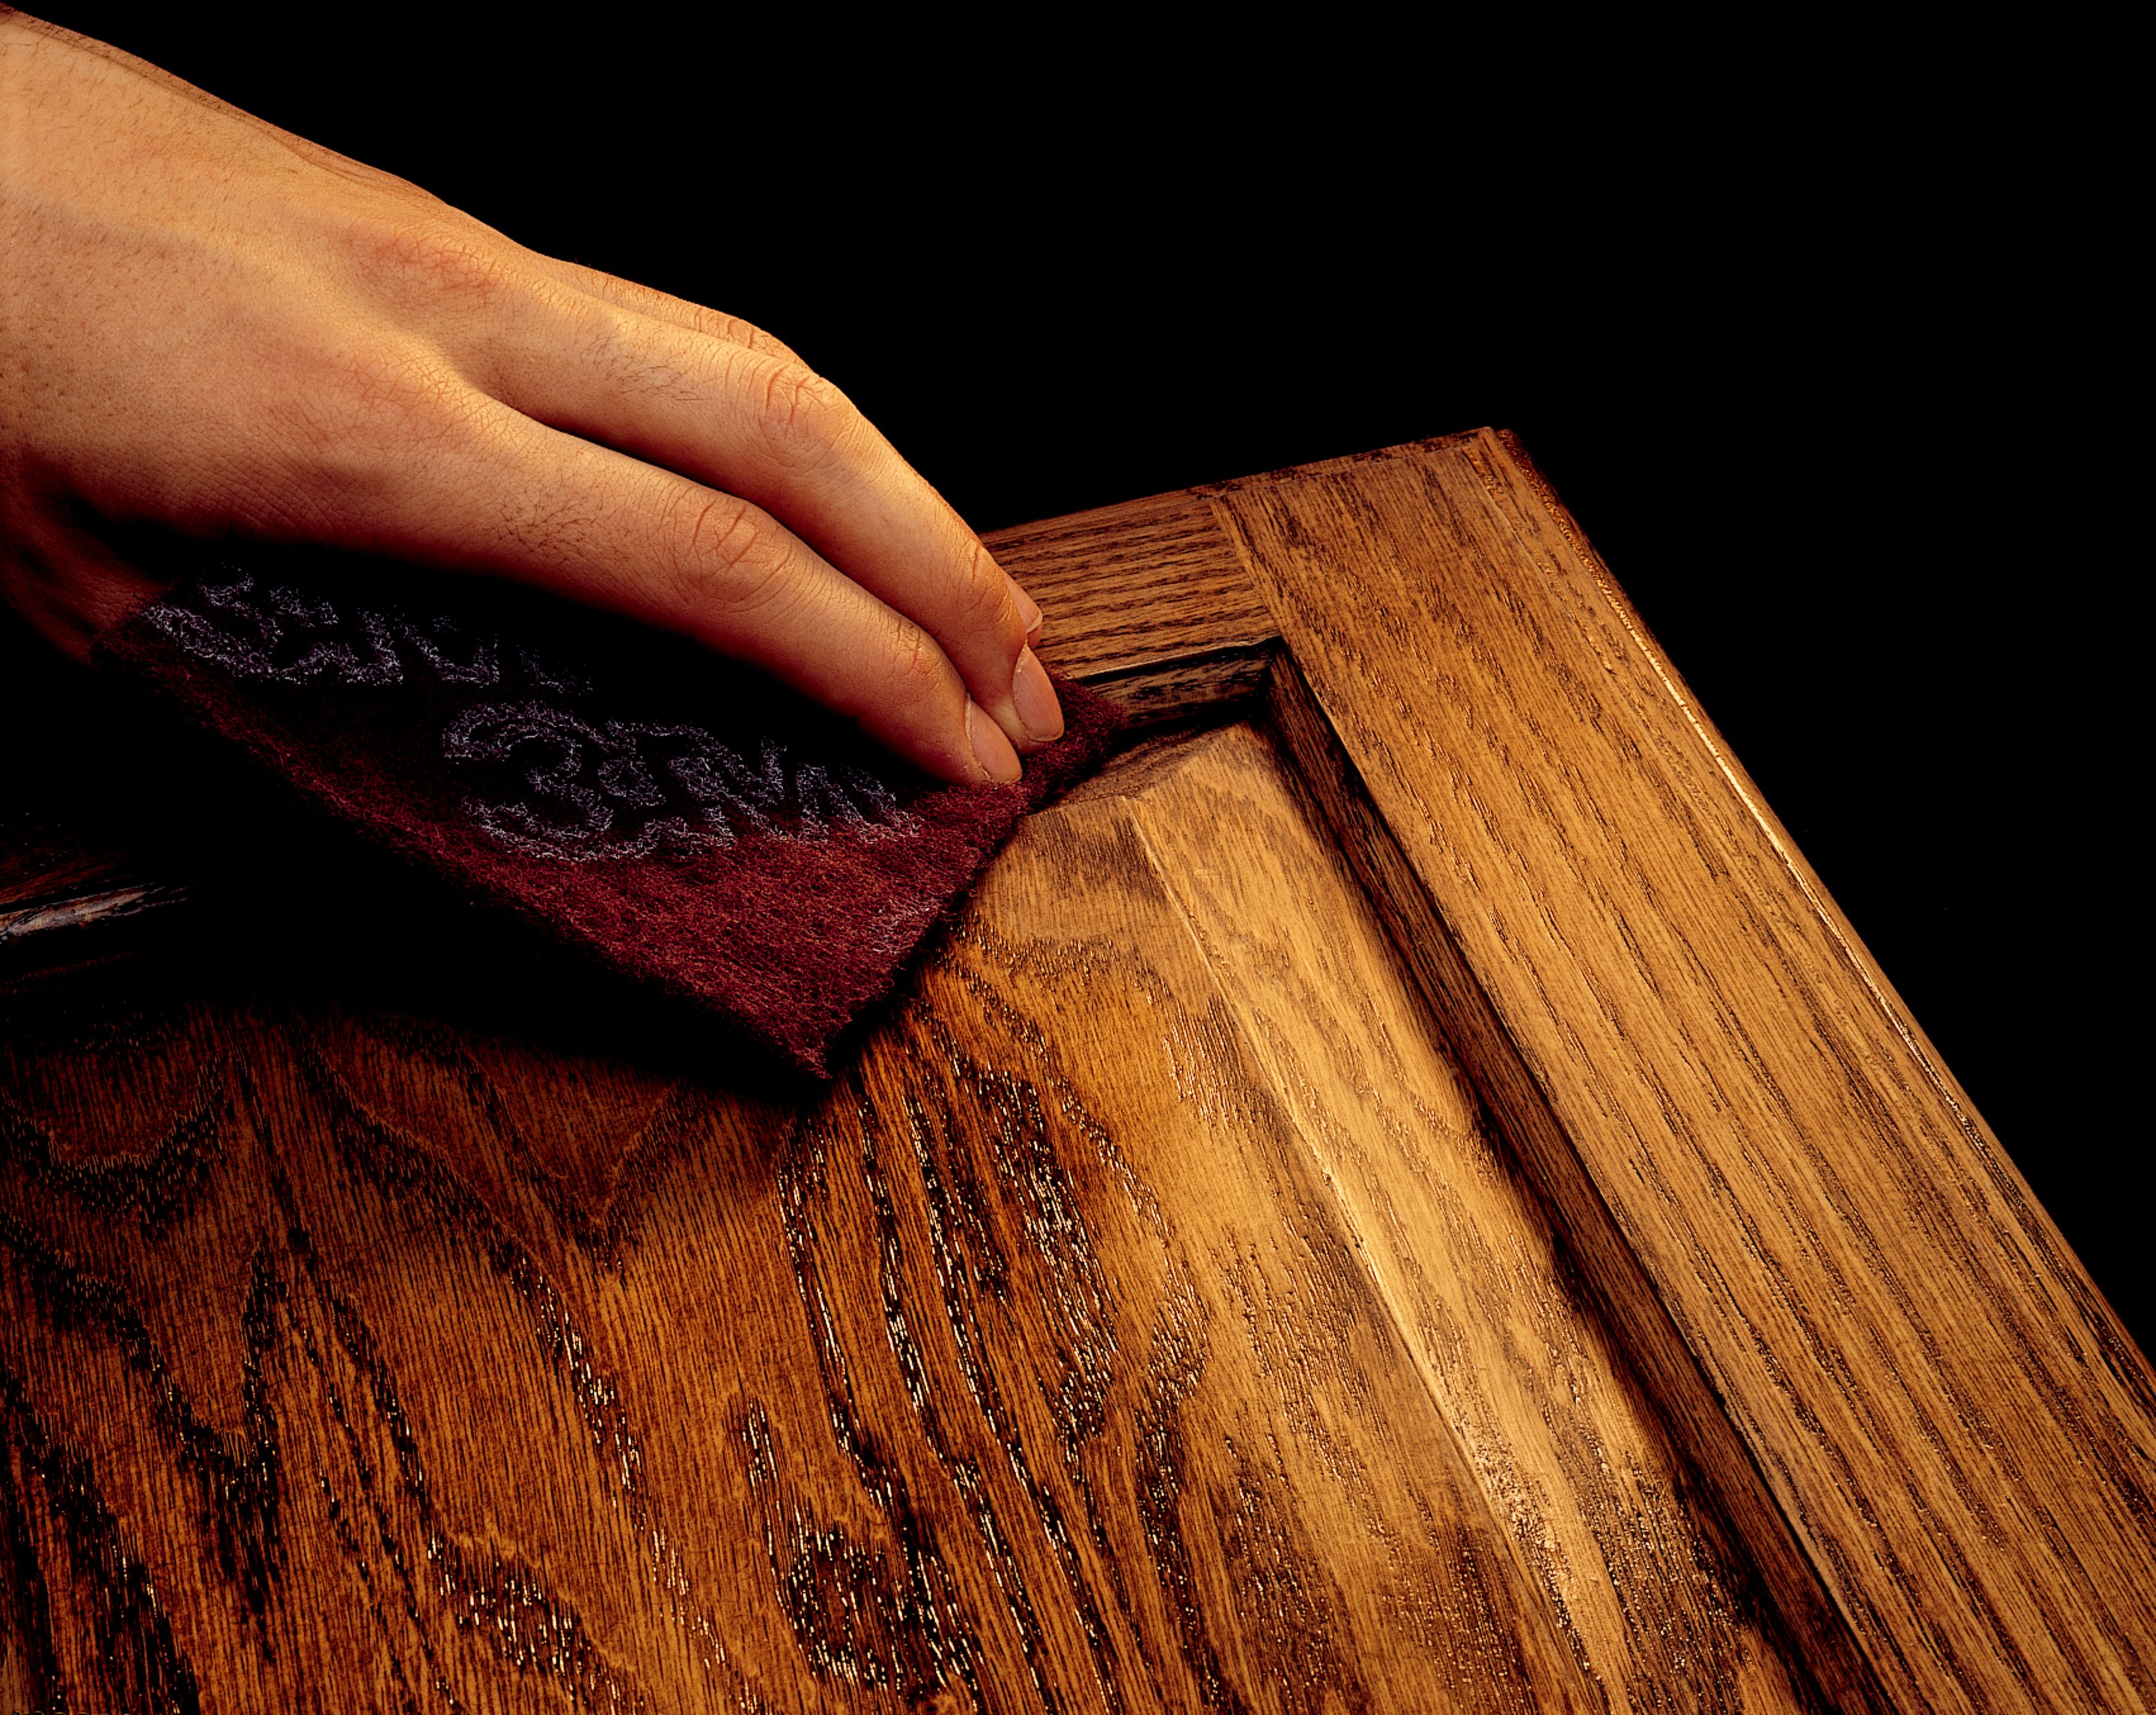 This maroon hand pad uses aluminum oxide abrasive.